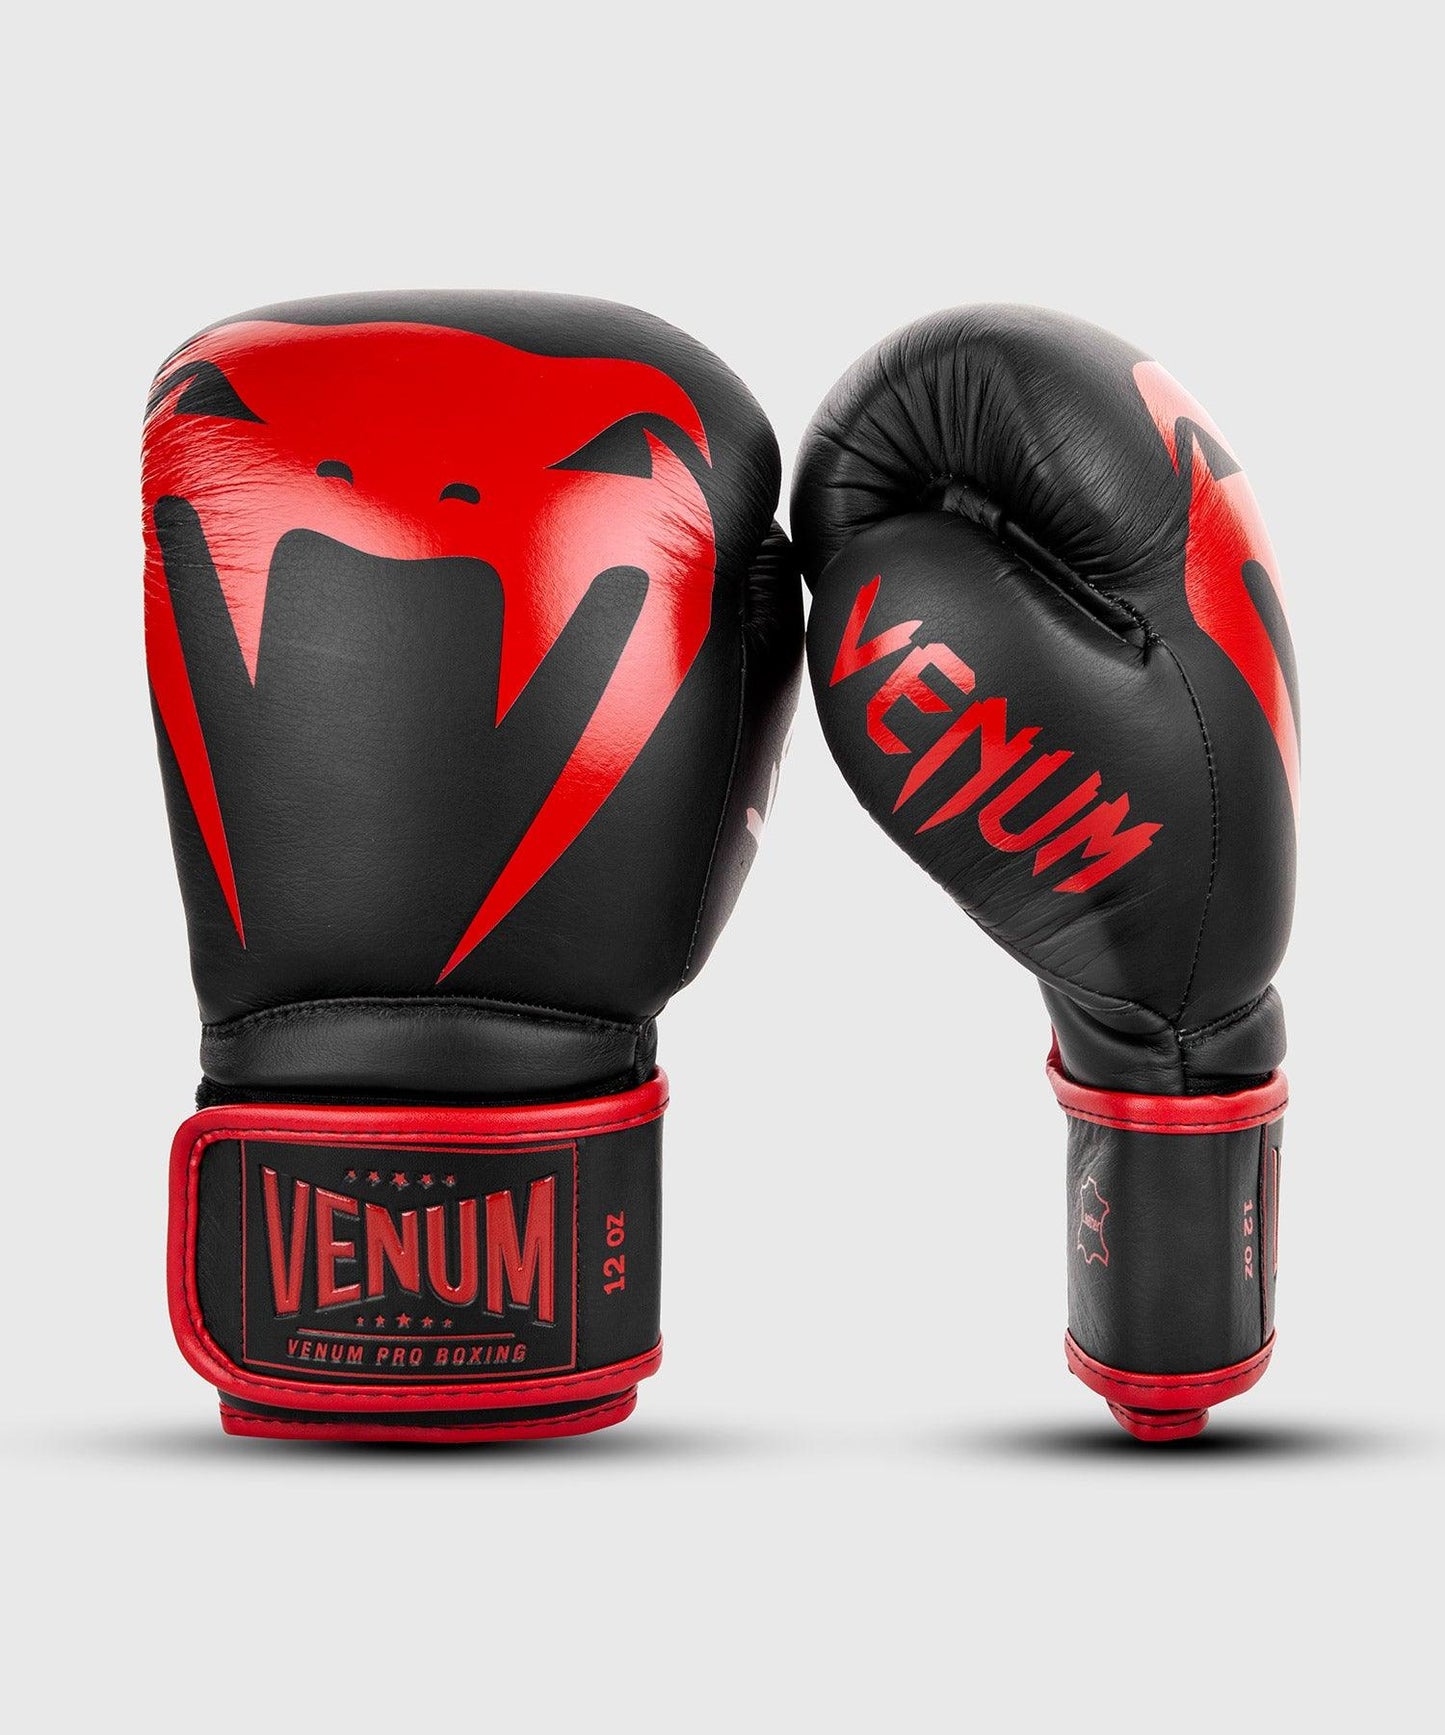 Venum Giant 2.0 Pro Boxing Gloves Velcro - Black/Red Picture 2